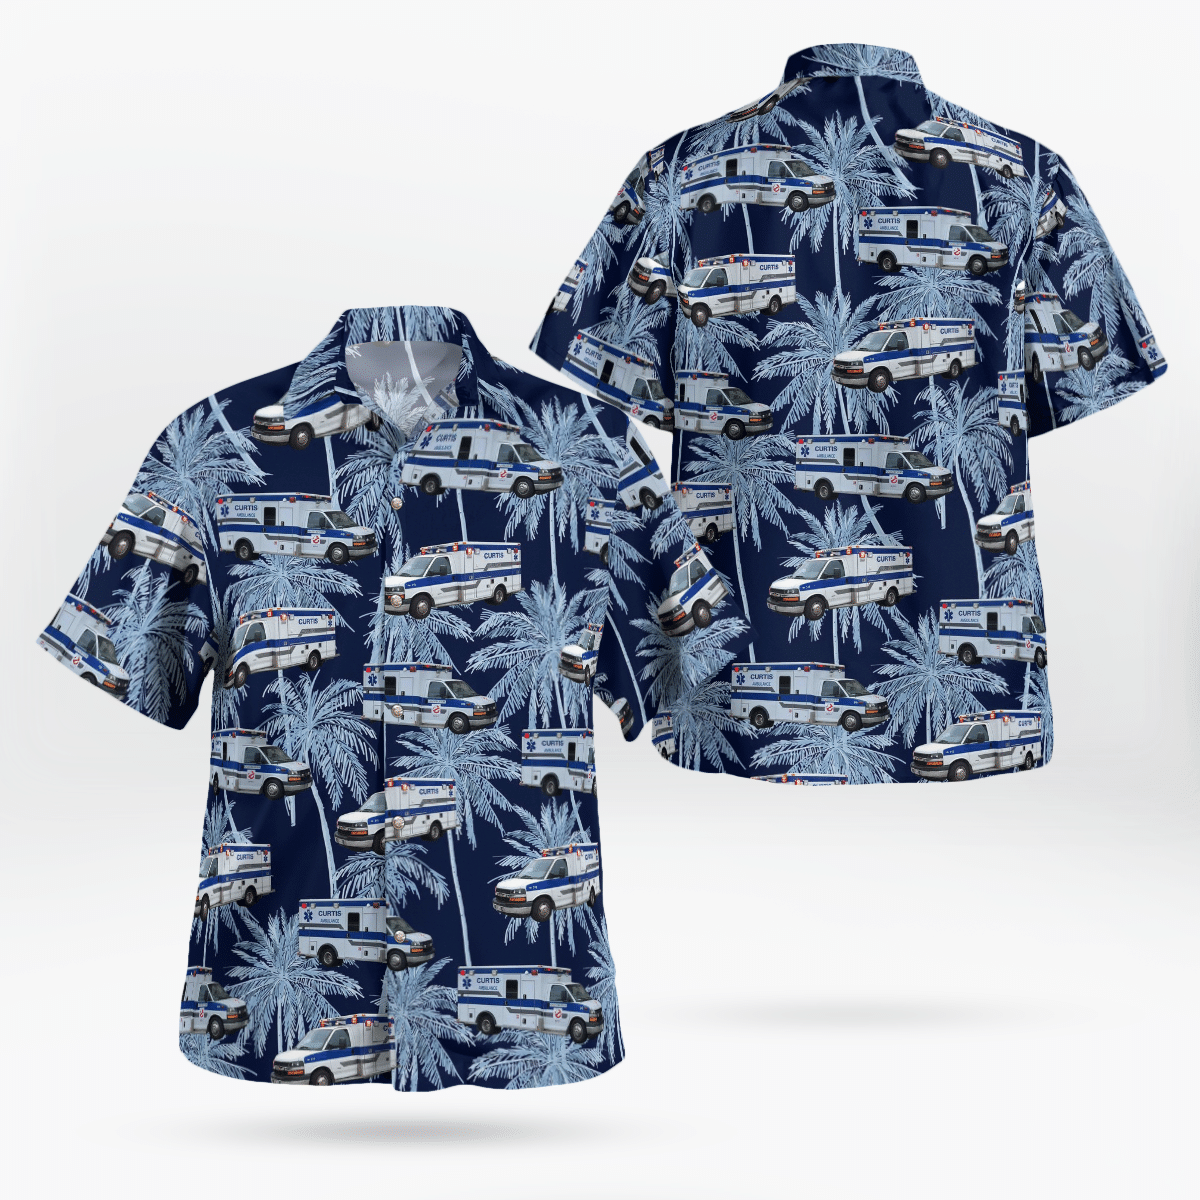 Shop now to find the perfect Hawaii Shirt for your hobby 95